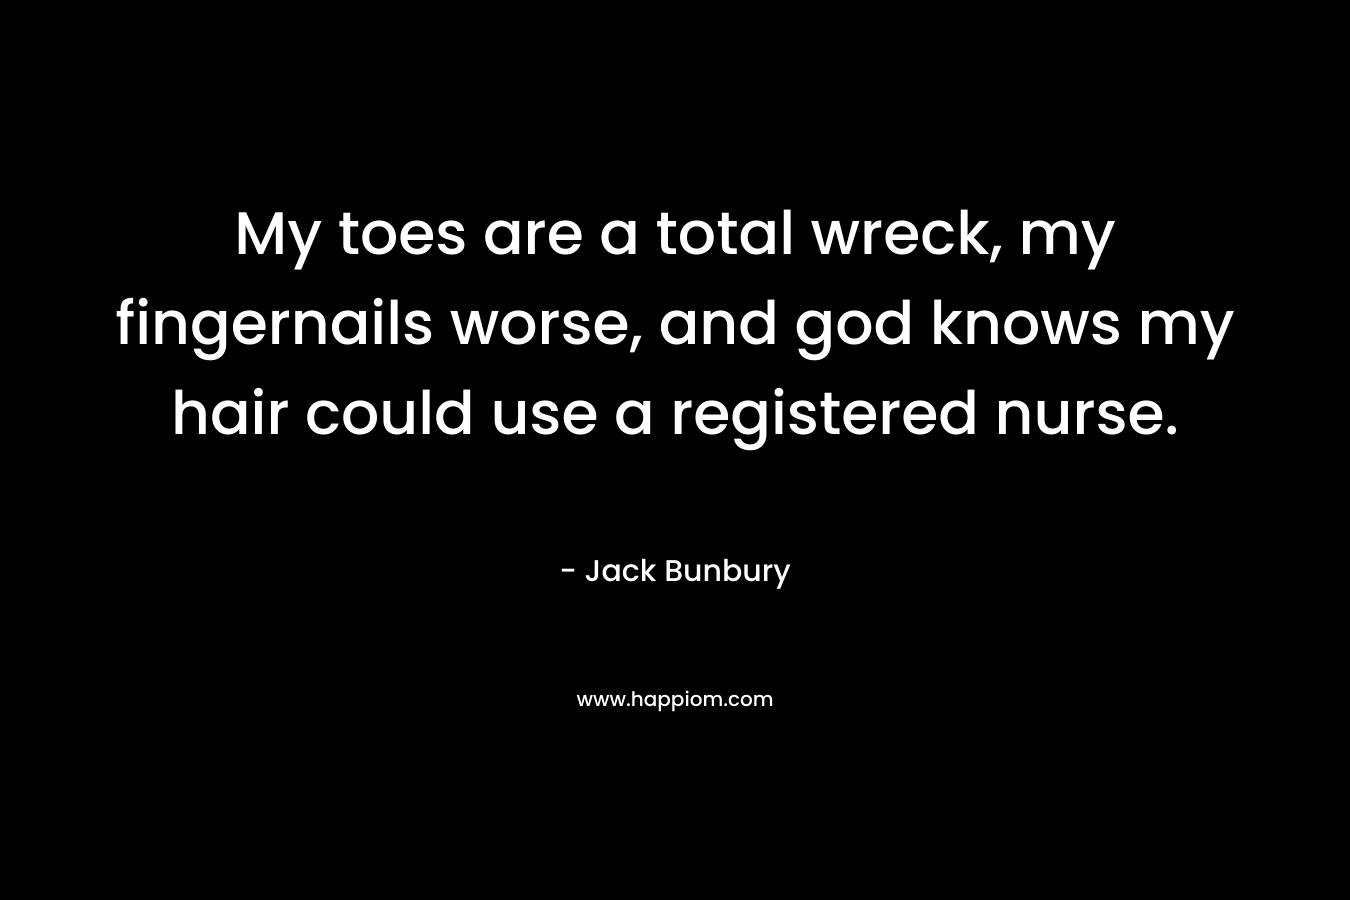 My toes are a total wreck, my fingernails worse, and god knows my hair could use a registered nurse.